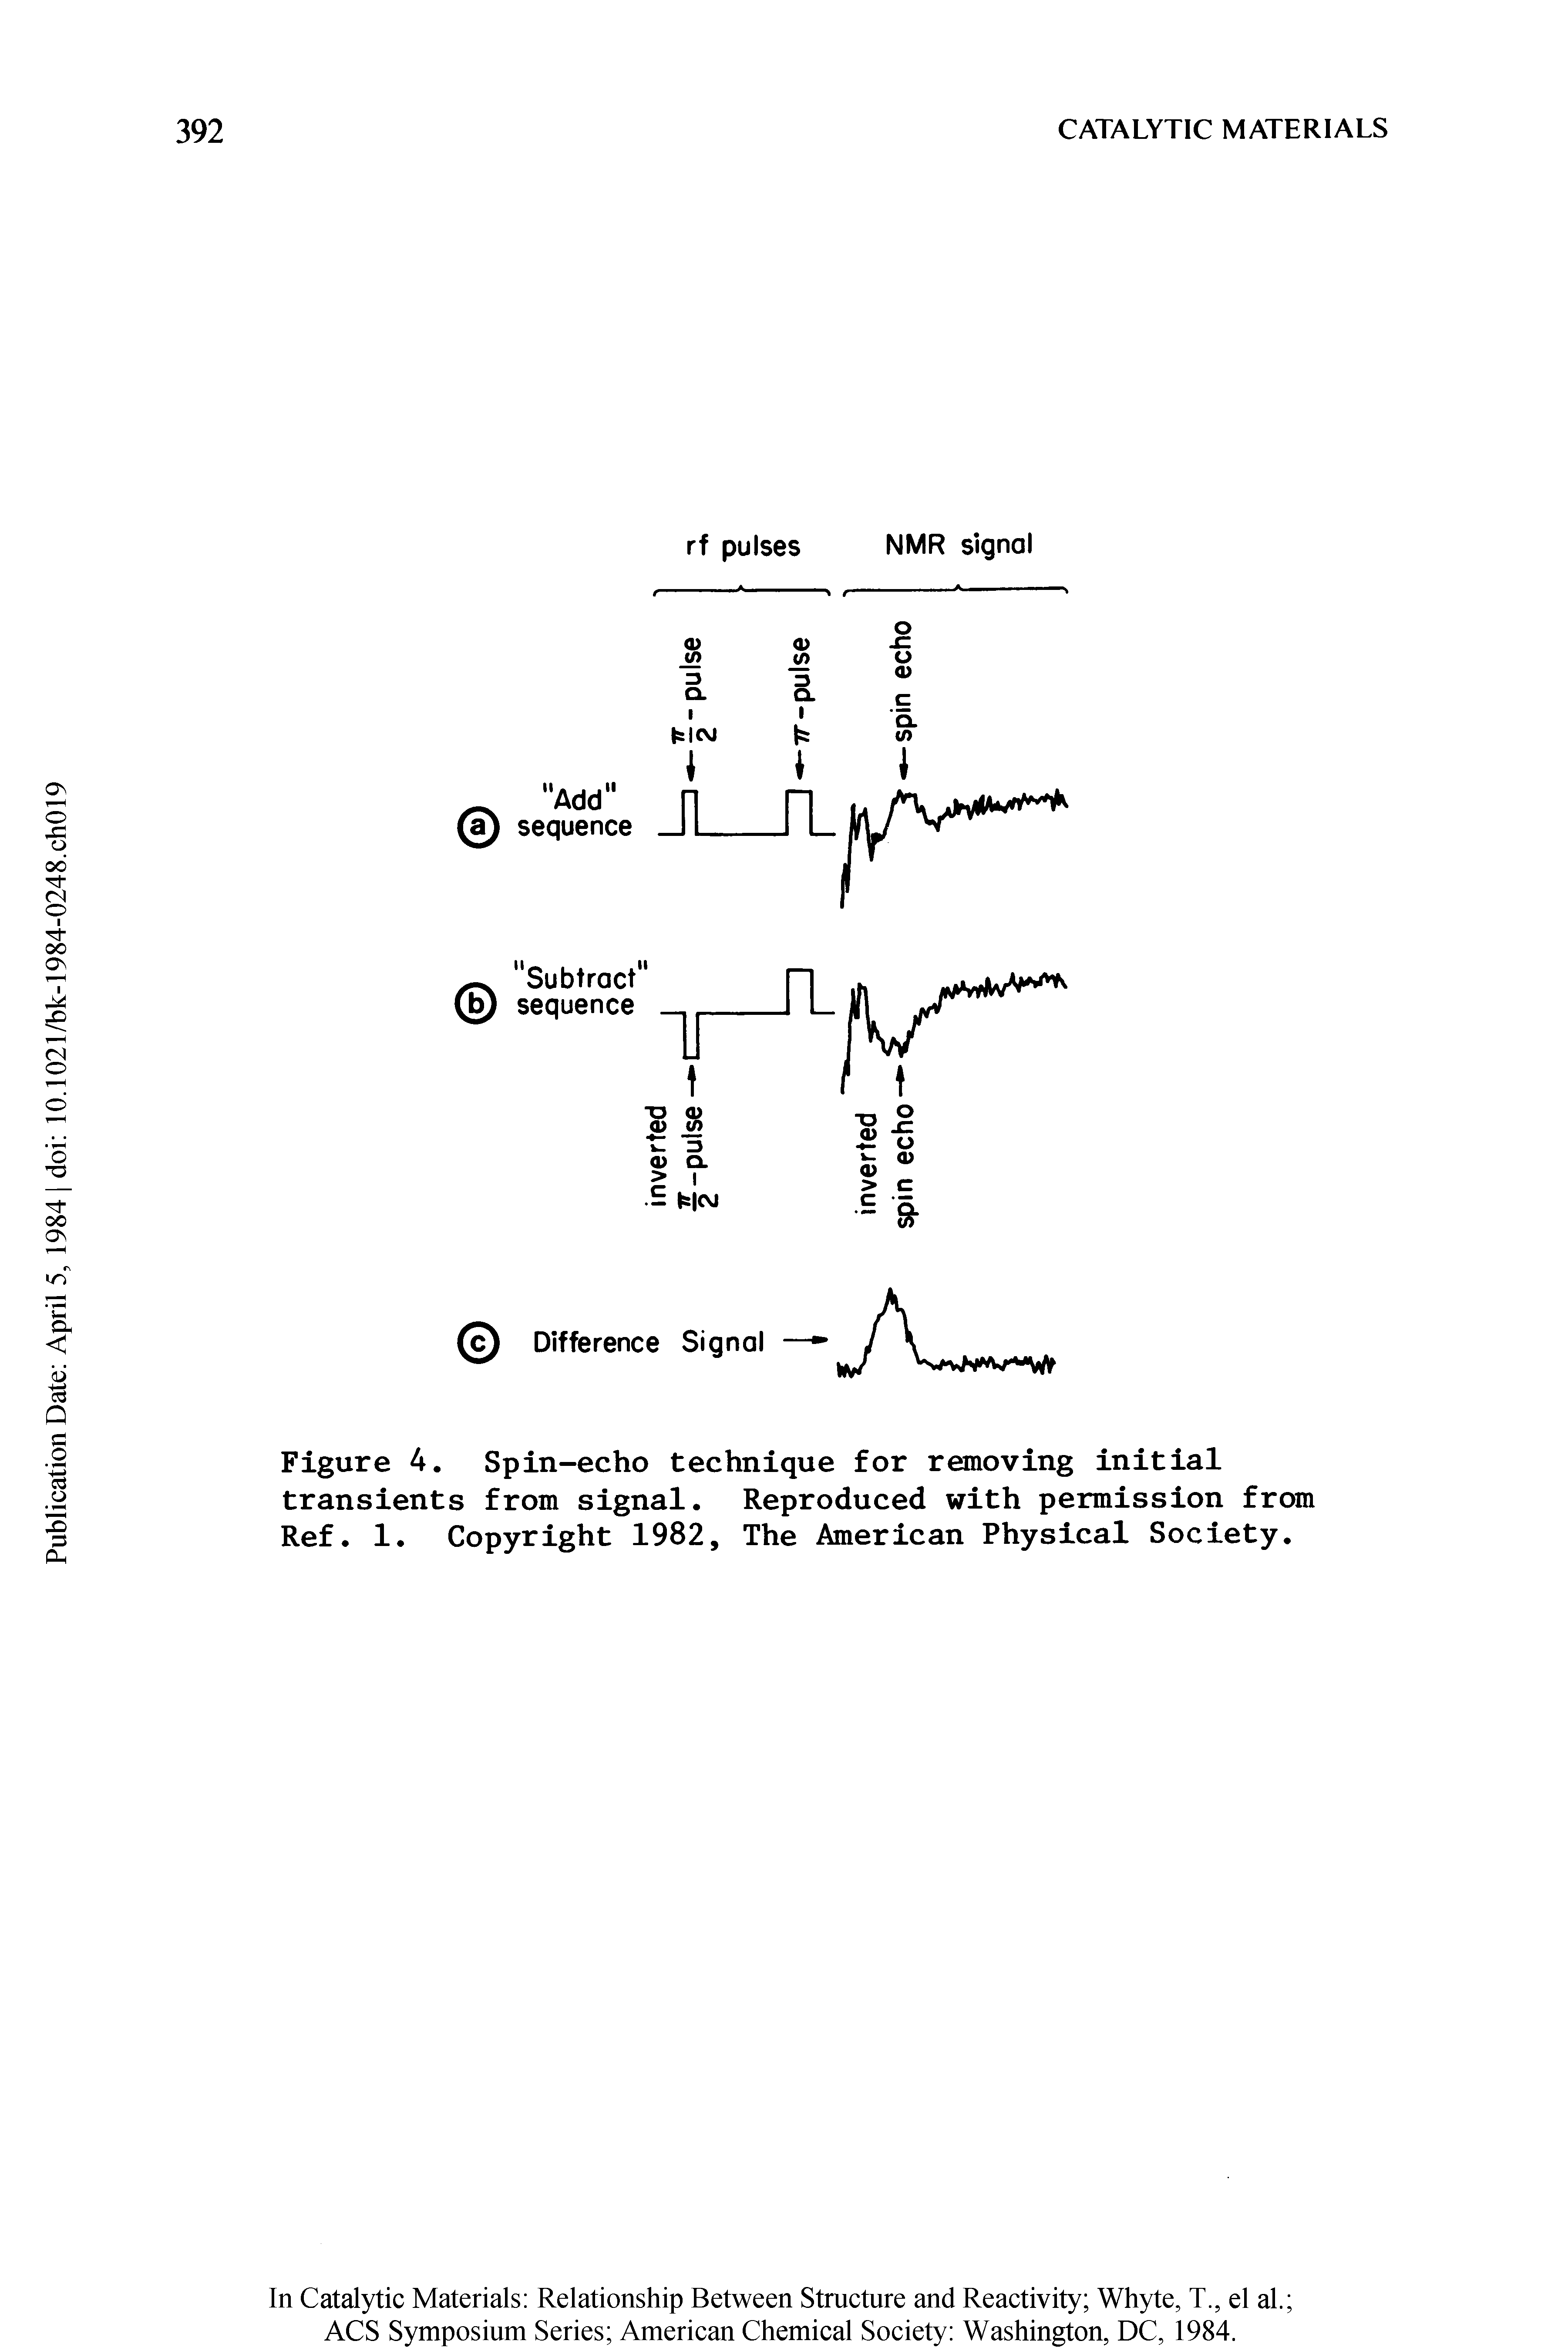 Figure 4. Spin-echo technique for removing initial transients from signal. Reproduced with permission from Ref. 1. Copyright 1982, The American Physical Society.